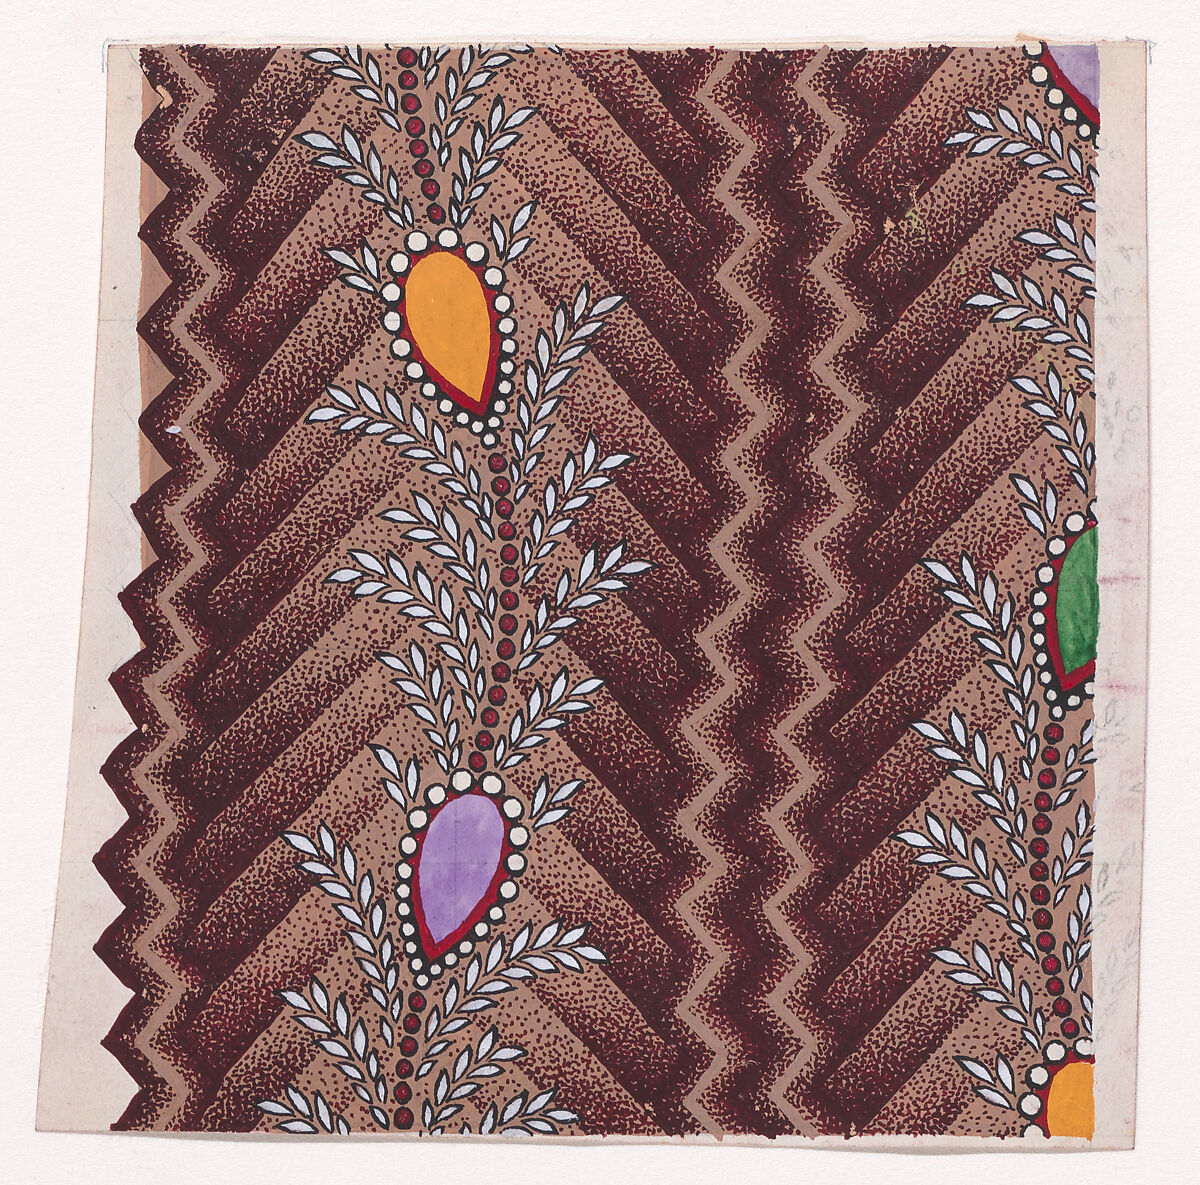 Textile Design with Vertical Undulating Garlands of Pearls and Inverted Teardrops Framed with Pearls with Offsetting Wheat Ears Separated by a Vertical Zig-Zagging Ribbon over a Chevron Background, Anonymous, Alsatian, 19th century, Gouache 